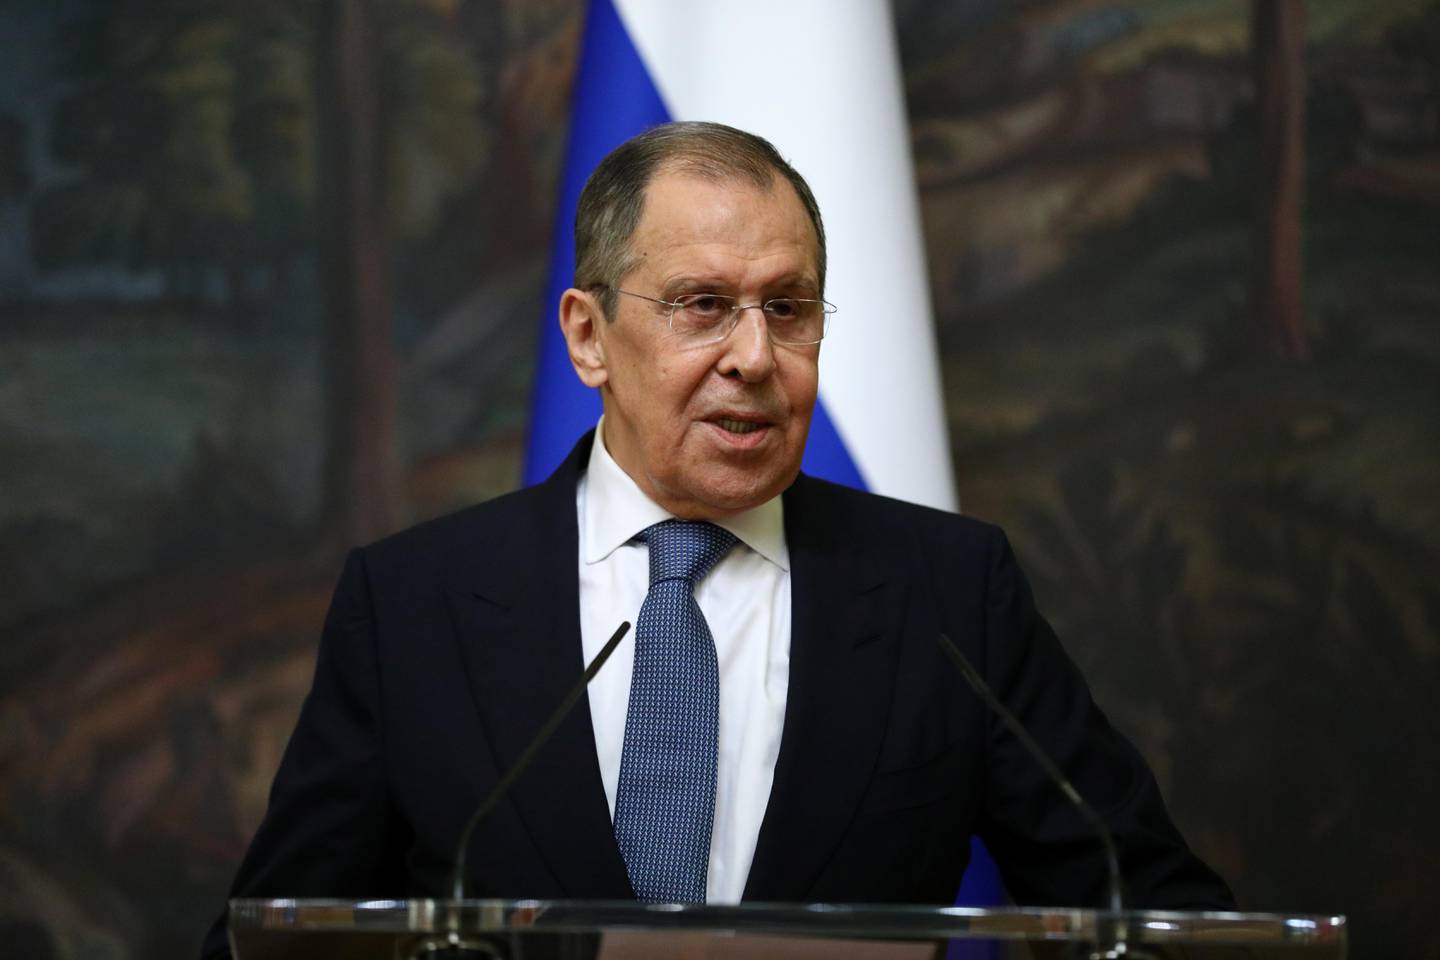 Russian Foreign Minister Sergei Lavrov speaks during a joint news conference with Italian Foreign Minister Luigi Di Maio (not pictured) in Moscow, Russia October 14, 2020. Russian Foreign Ministry/Handout via REUTERS ATTENTION EDITORS - THIS IMAGE WAS PROVIDED BY A THIRD PARTY. NO RESALES. NO ARCHIVES. MANDATORY CREDIT.